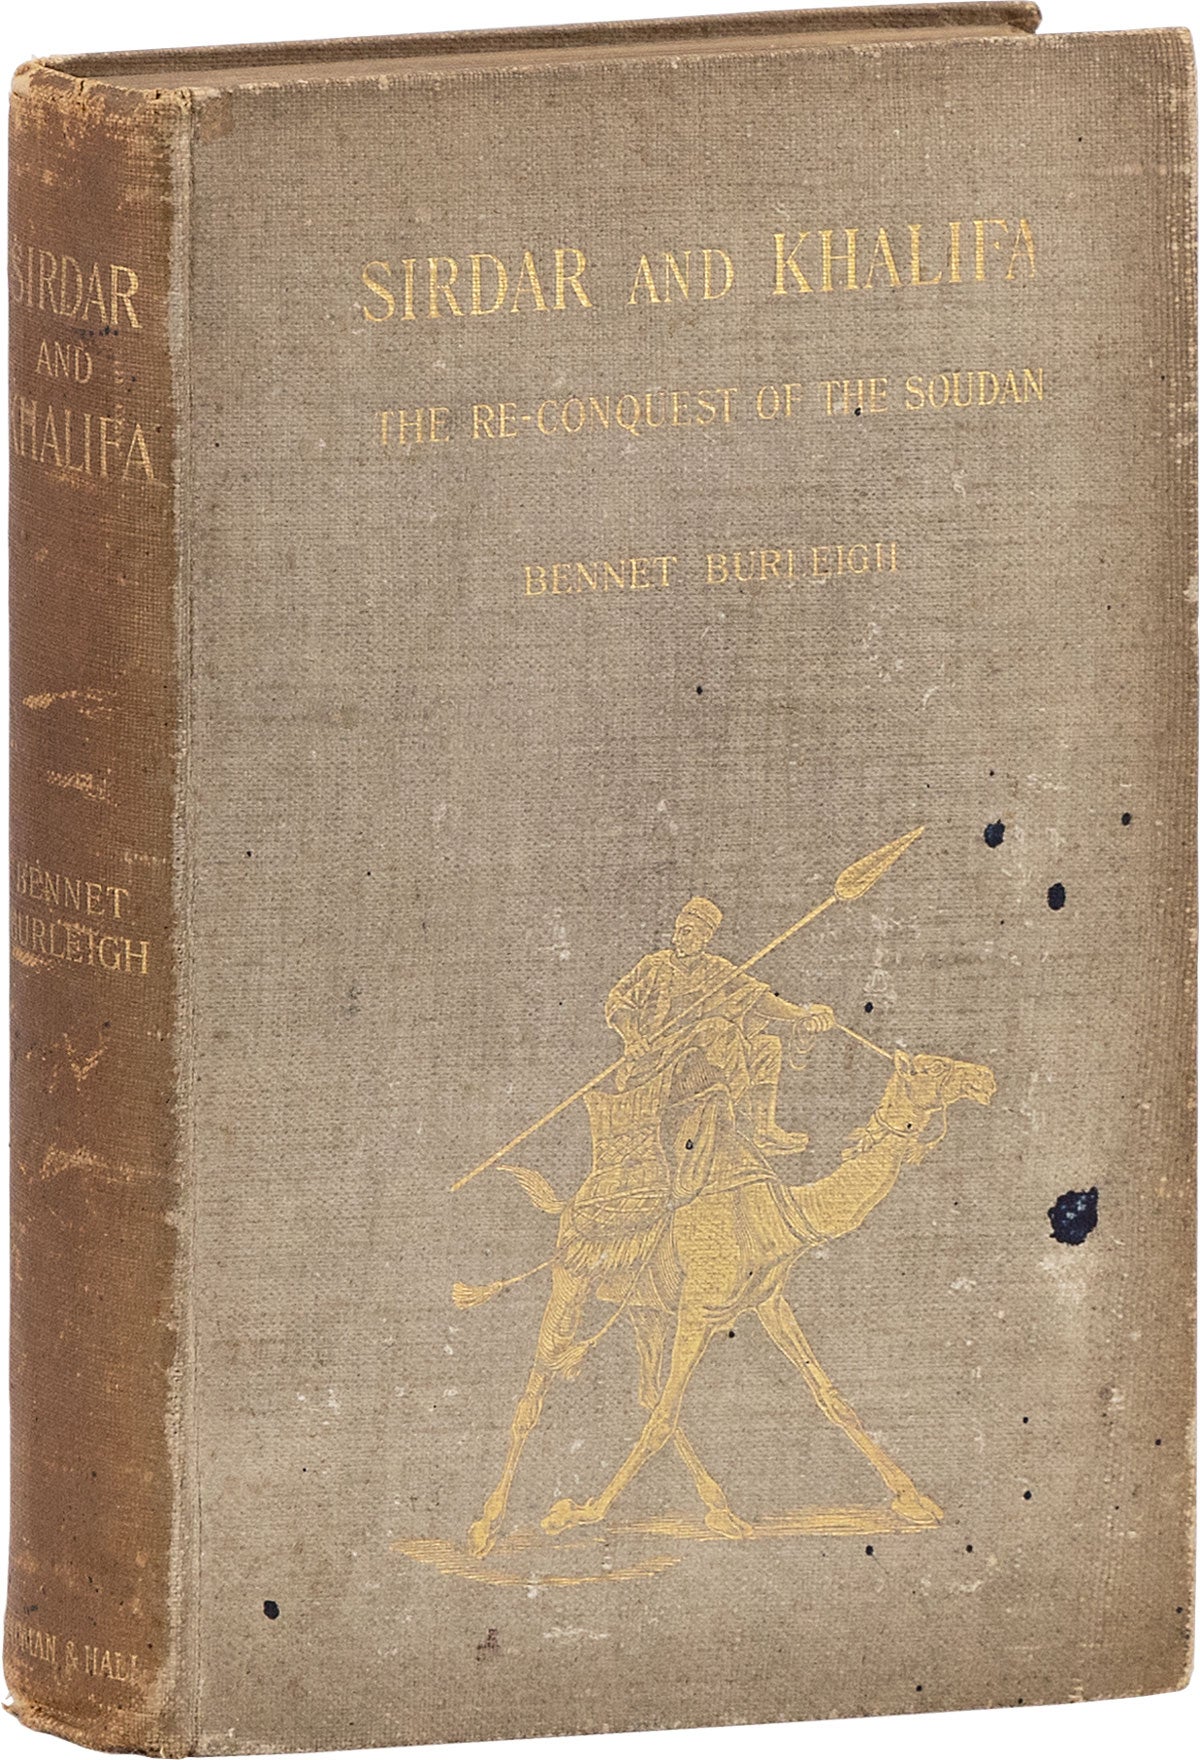 [Item #80747] Sirdar and Khalifa, or The Re-Conquest of The Soudan 1898. Bennet BURLEIGH.